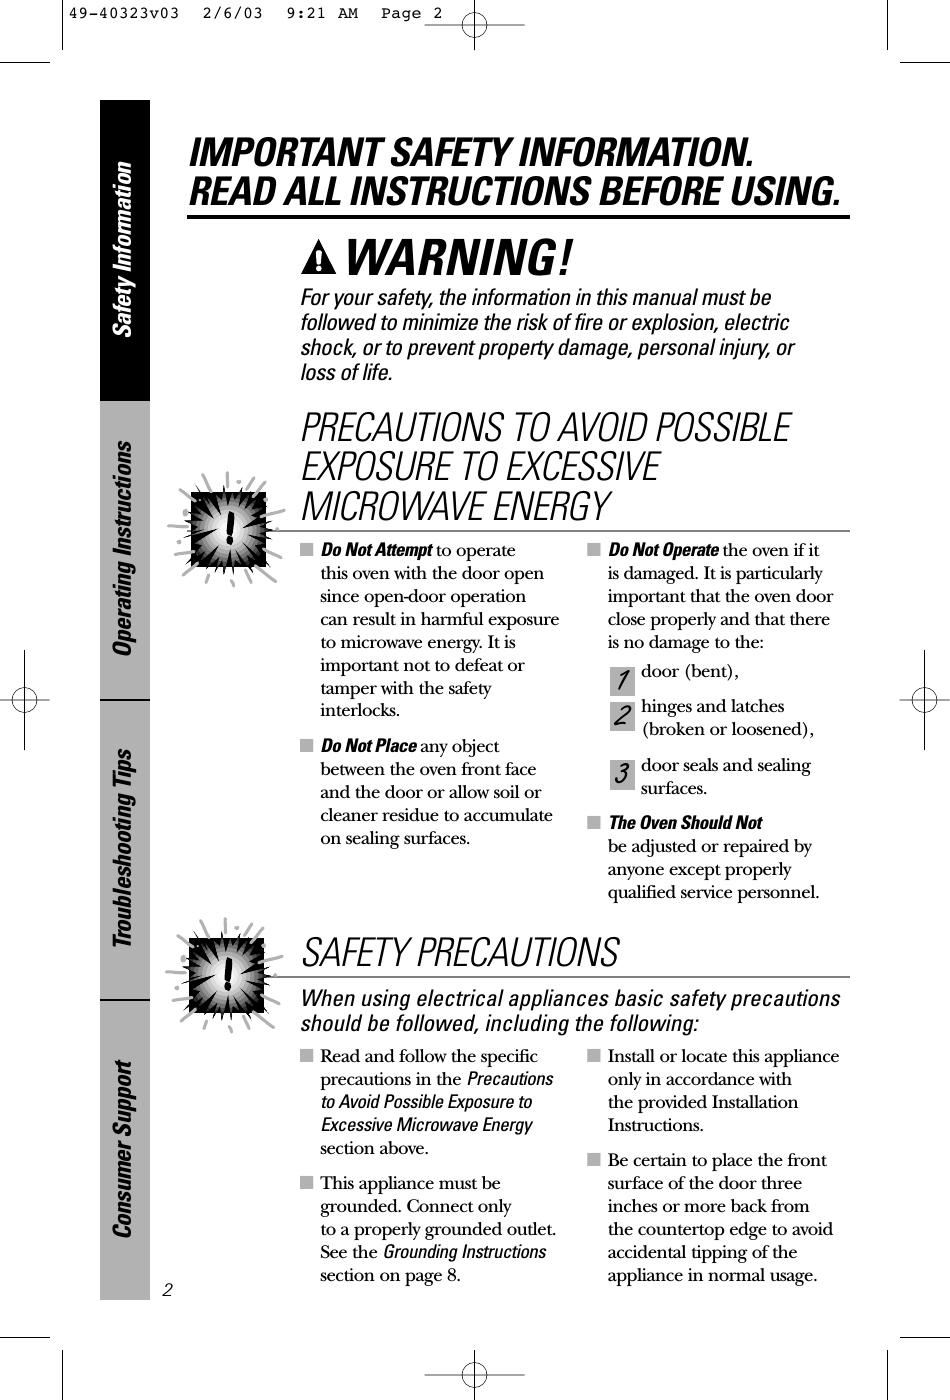 ■Read and follow the specificprecautions in the Precautionsto Avoid Possible Exposure toExcessive Microwave Energysection above.■This appliance must begrounded. Connect only to a properly grounded outlet.See the Grounding Instructionssection on page 8.■Install or locate this applianceonly in accordance with the provided InstallationInstructions.■Be certain to place the frontsurface of the door threeinches or more back from the countertop edge to avoidaccidental tipping of theappliance in normal usage.■Do Not Attempt to operate this oven with the door opensince open-door operation can result in harmful exposure to microwave energy. It isimportant not to defeat ortamper with the safetyinterlocks.■Do Not Place any objectbetween the oven front faceand the door or allow soil orcleaner residue to accumulateon sealing surfaces.■Do Not Operate the oven if it is damaged. It is particularlyimportant that the oven doorclose properly and that there is no damage to the:door (bent),hinges and latches (broken or loosened),door seals and sealingsurfaces.■The Oven Should Not be adjusted or repaired byanyone except properlyqualified service personnel.321PRECAUTIONS TO AVOID POSSIBLEEXPOSURE TO EXCESSIVEMICROWAVE ENERGYSafety InformationOperating InstructionsTroubleshooting TipsConsumer SupportIMPORTANT SAFETY INFORMATION.READ ALL INSTRUCTIONS BEFORE USING.2For your safety, the information in this manual must befollowed to minimize the risk of fire or explosion, electricshock, or to prevent property damage, personal injury, or loss of life.WARNING! When using electrical appliances basic safety precautionsshould be followed, including the following:SAFETY PRECAUTIONS49-40323v03  2/6/03  9:21 AM  Page 2